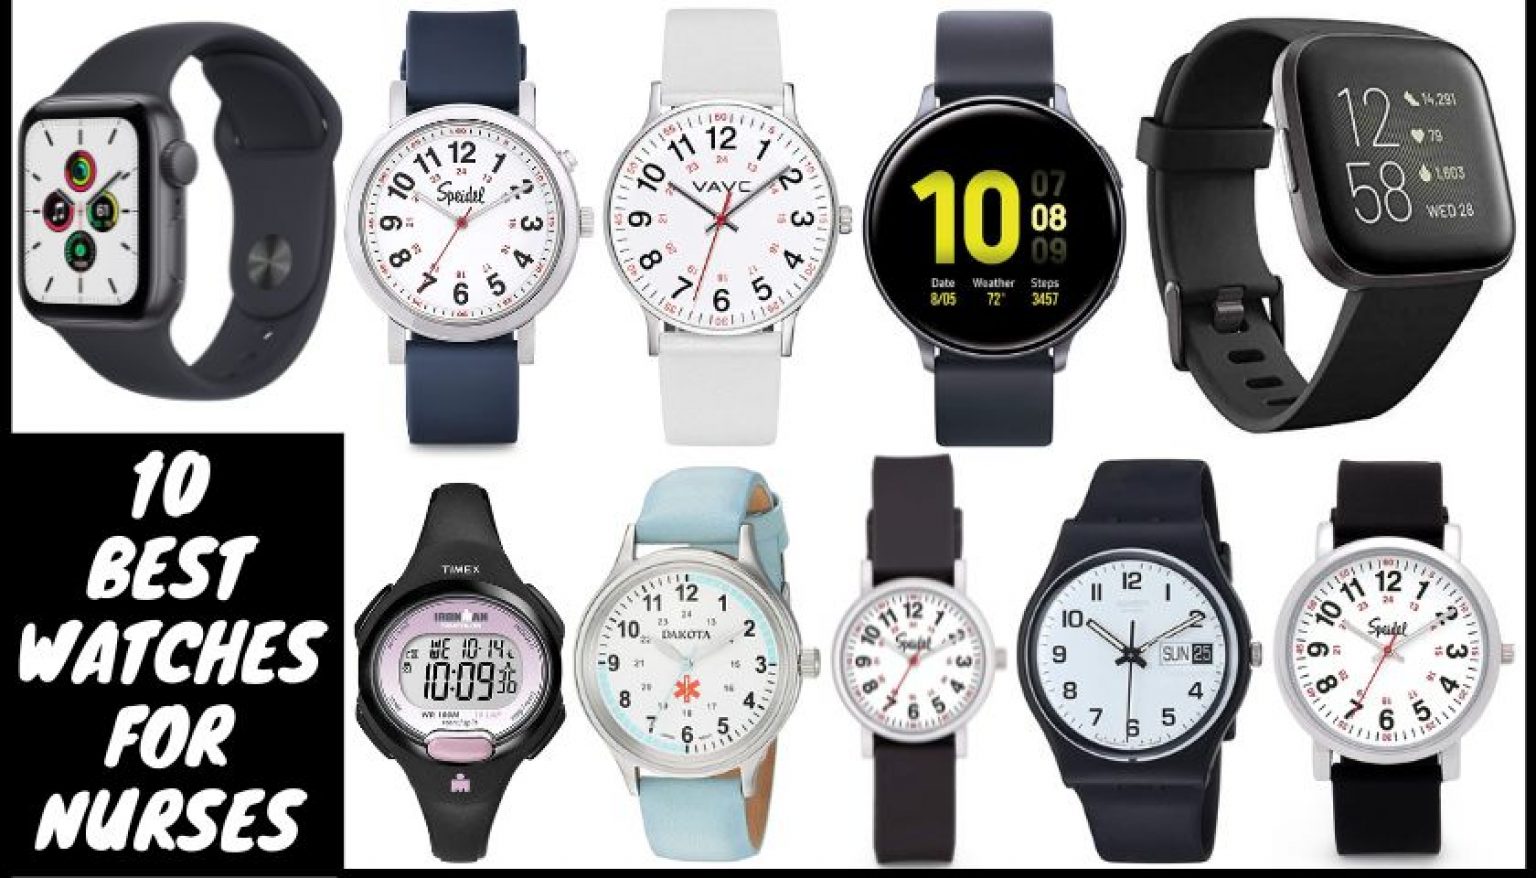 The 10 Best Watches For Nurses 2023 Picked Watch